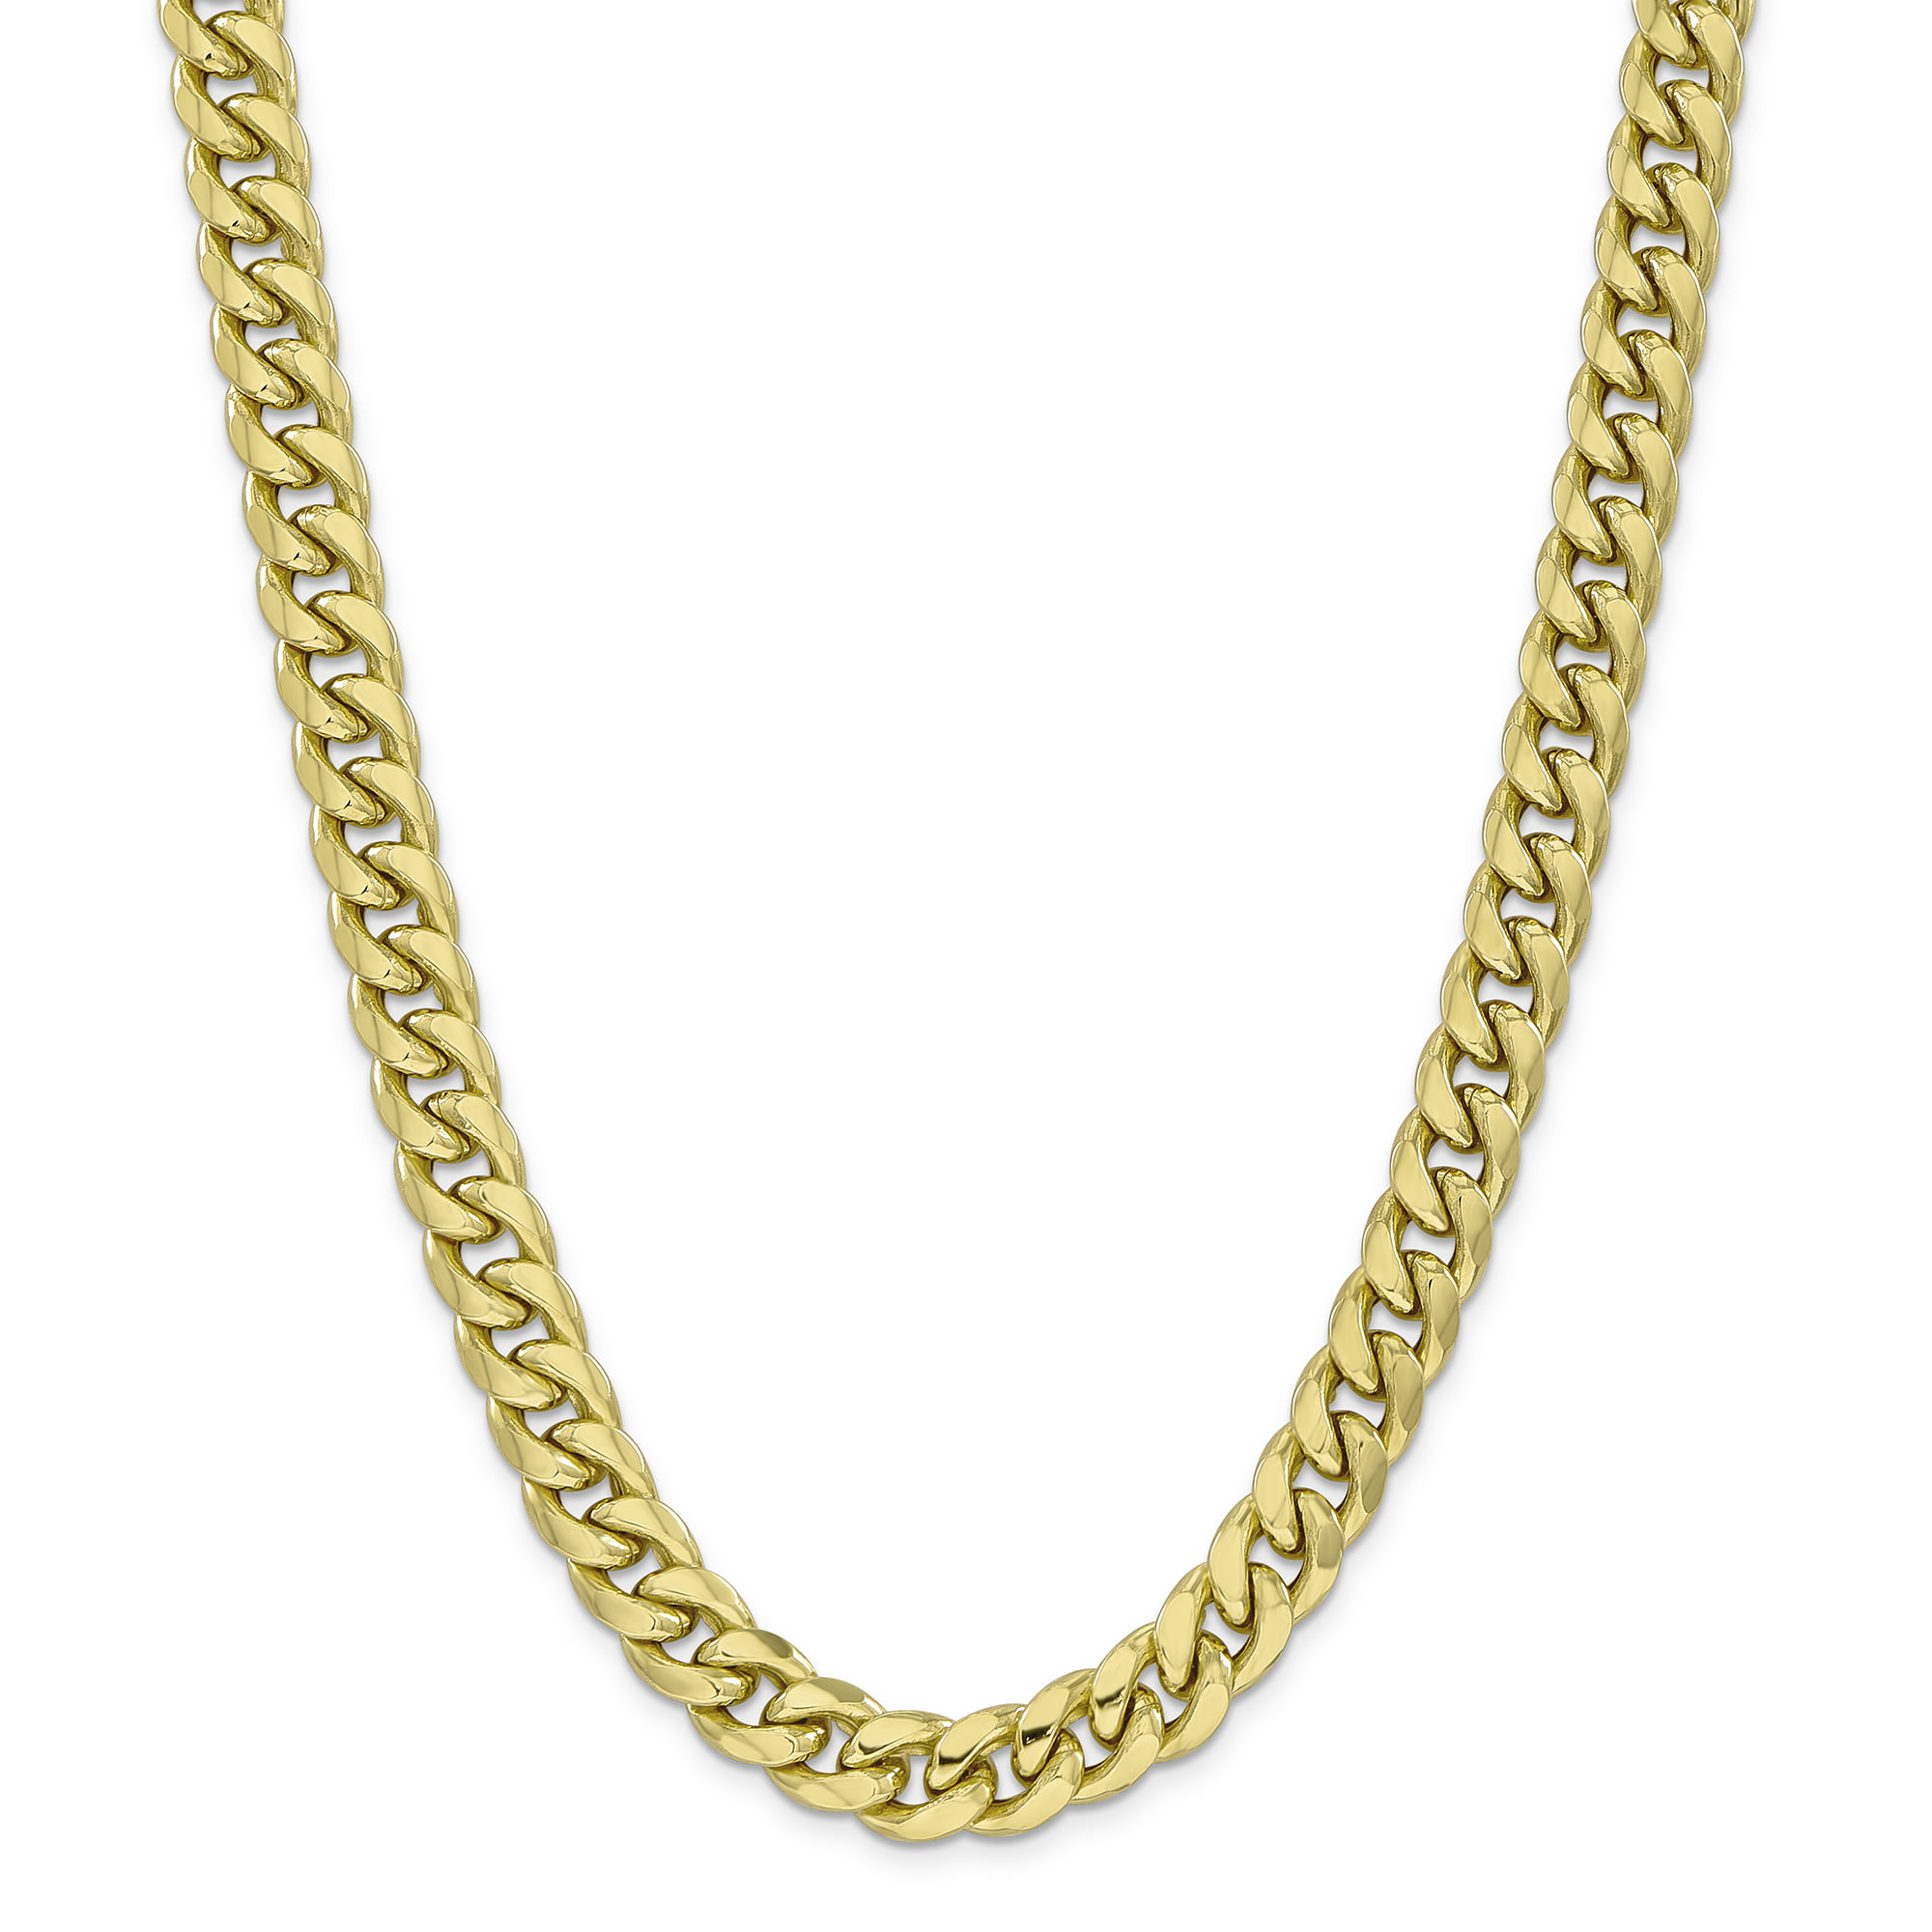 10k Yellow Gold 11mm Miami Cuban Chain Necklace 22 Inch Pendant 